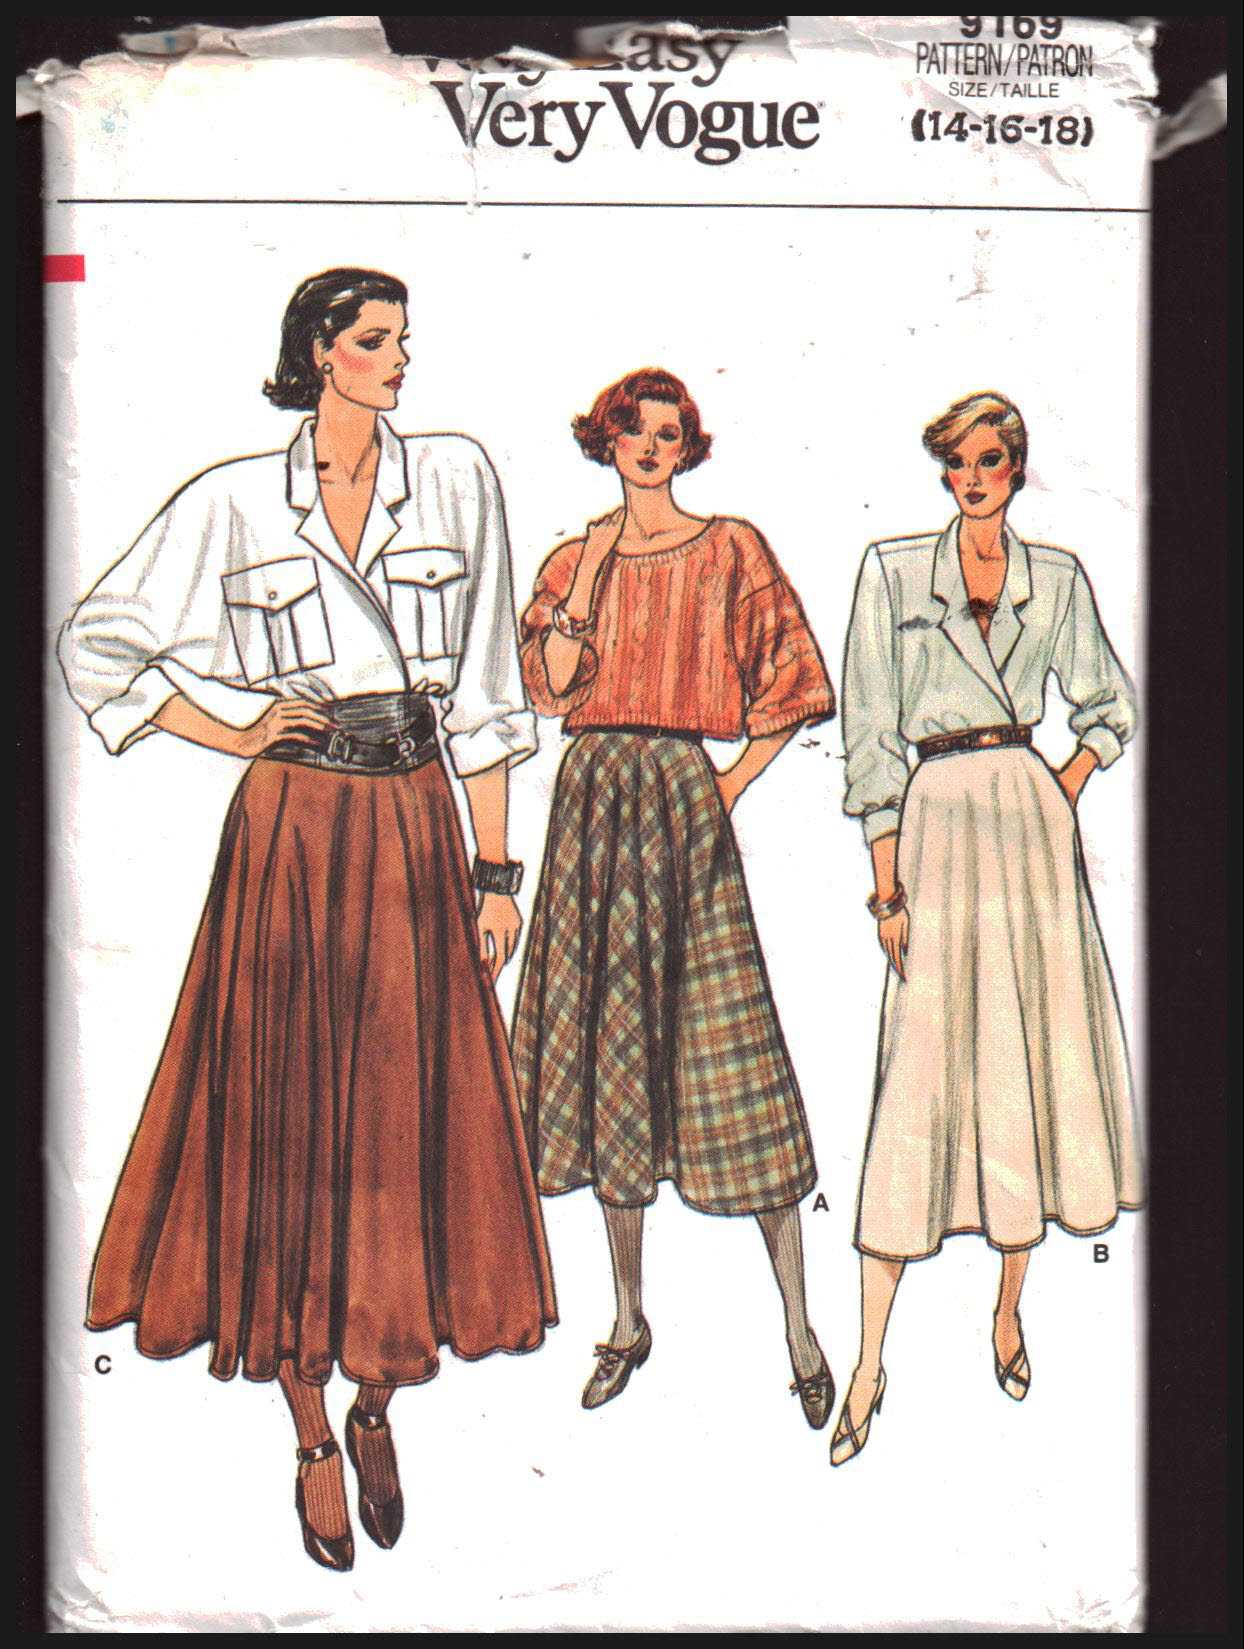 Vogue 9169 Skirt Size: 14-16-18 Used Sewing Pattern